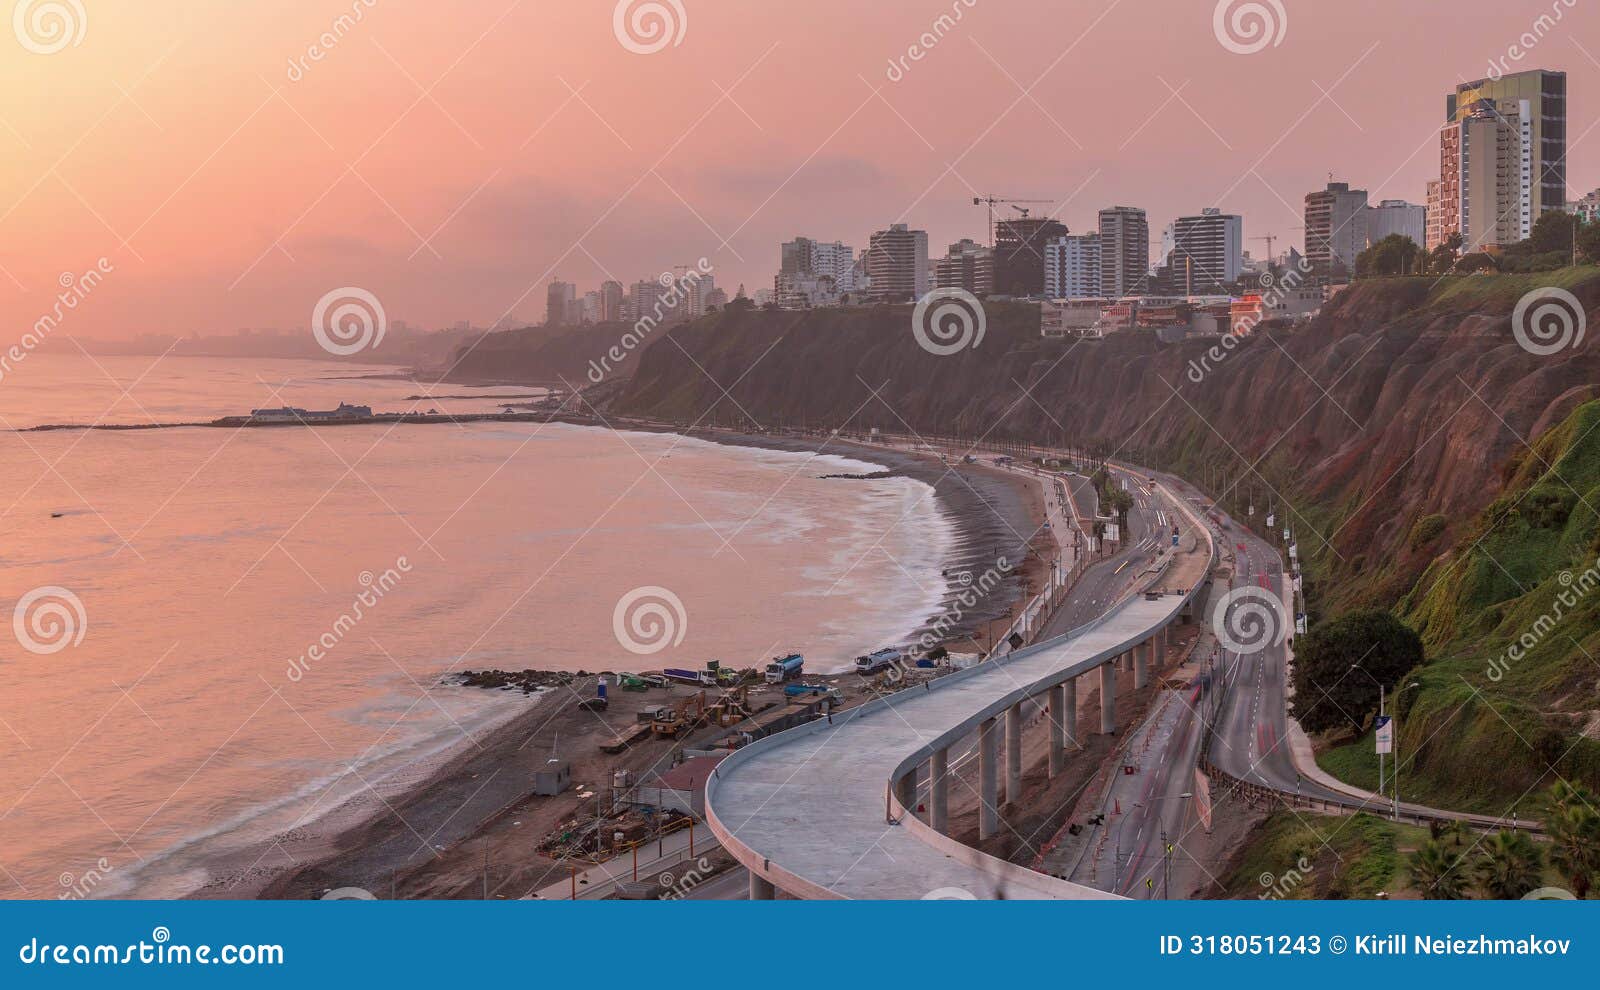 aerial view of lima's coastline in the neighborhood of miraflores during sunset timelapse, lima, peru